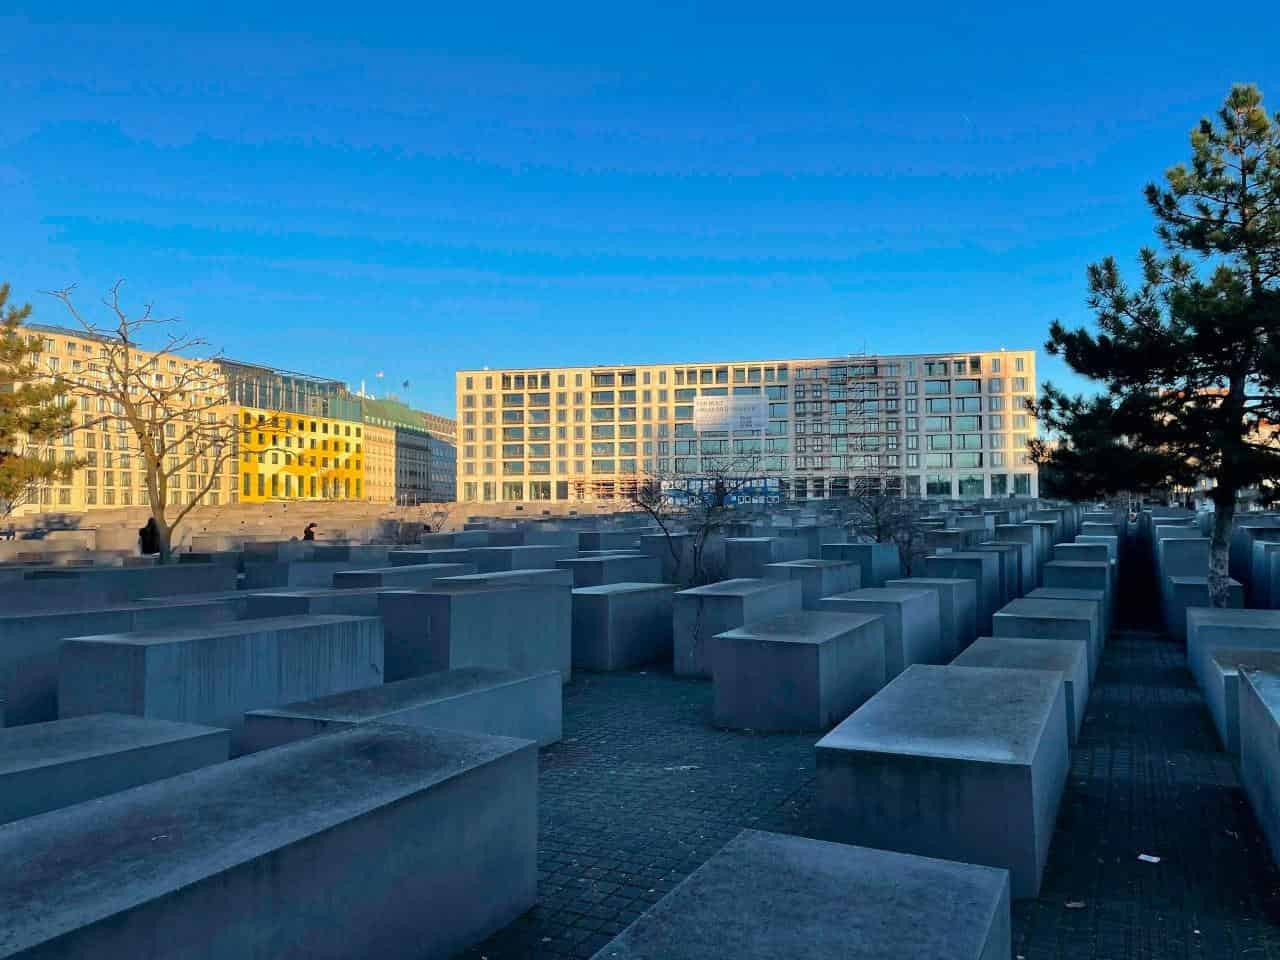 free things to do in berlin - Memorial to the Murdered Jews of Europe holocaust Memorial